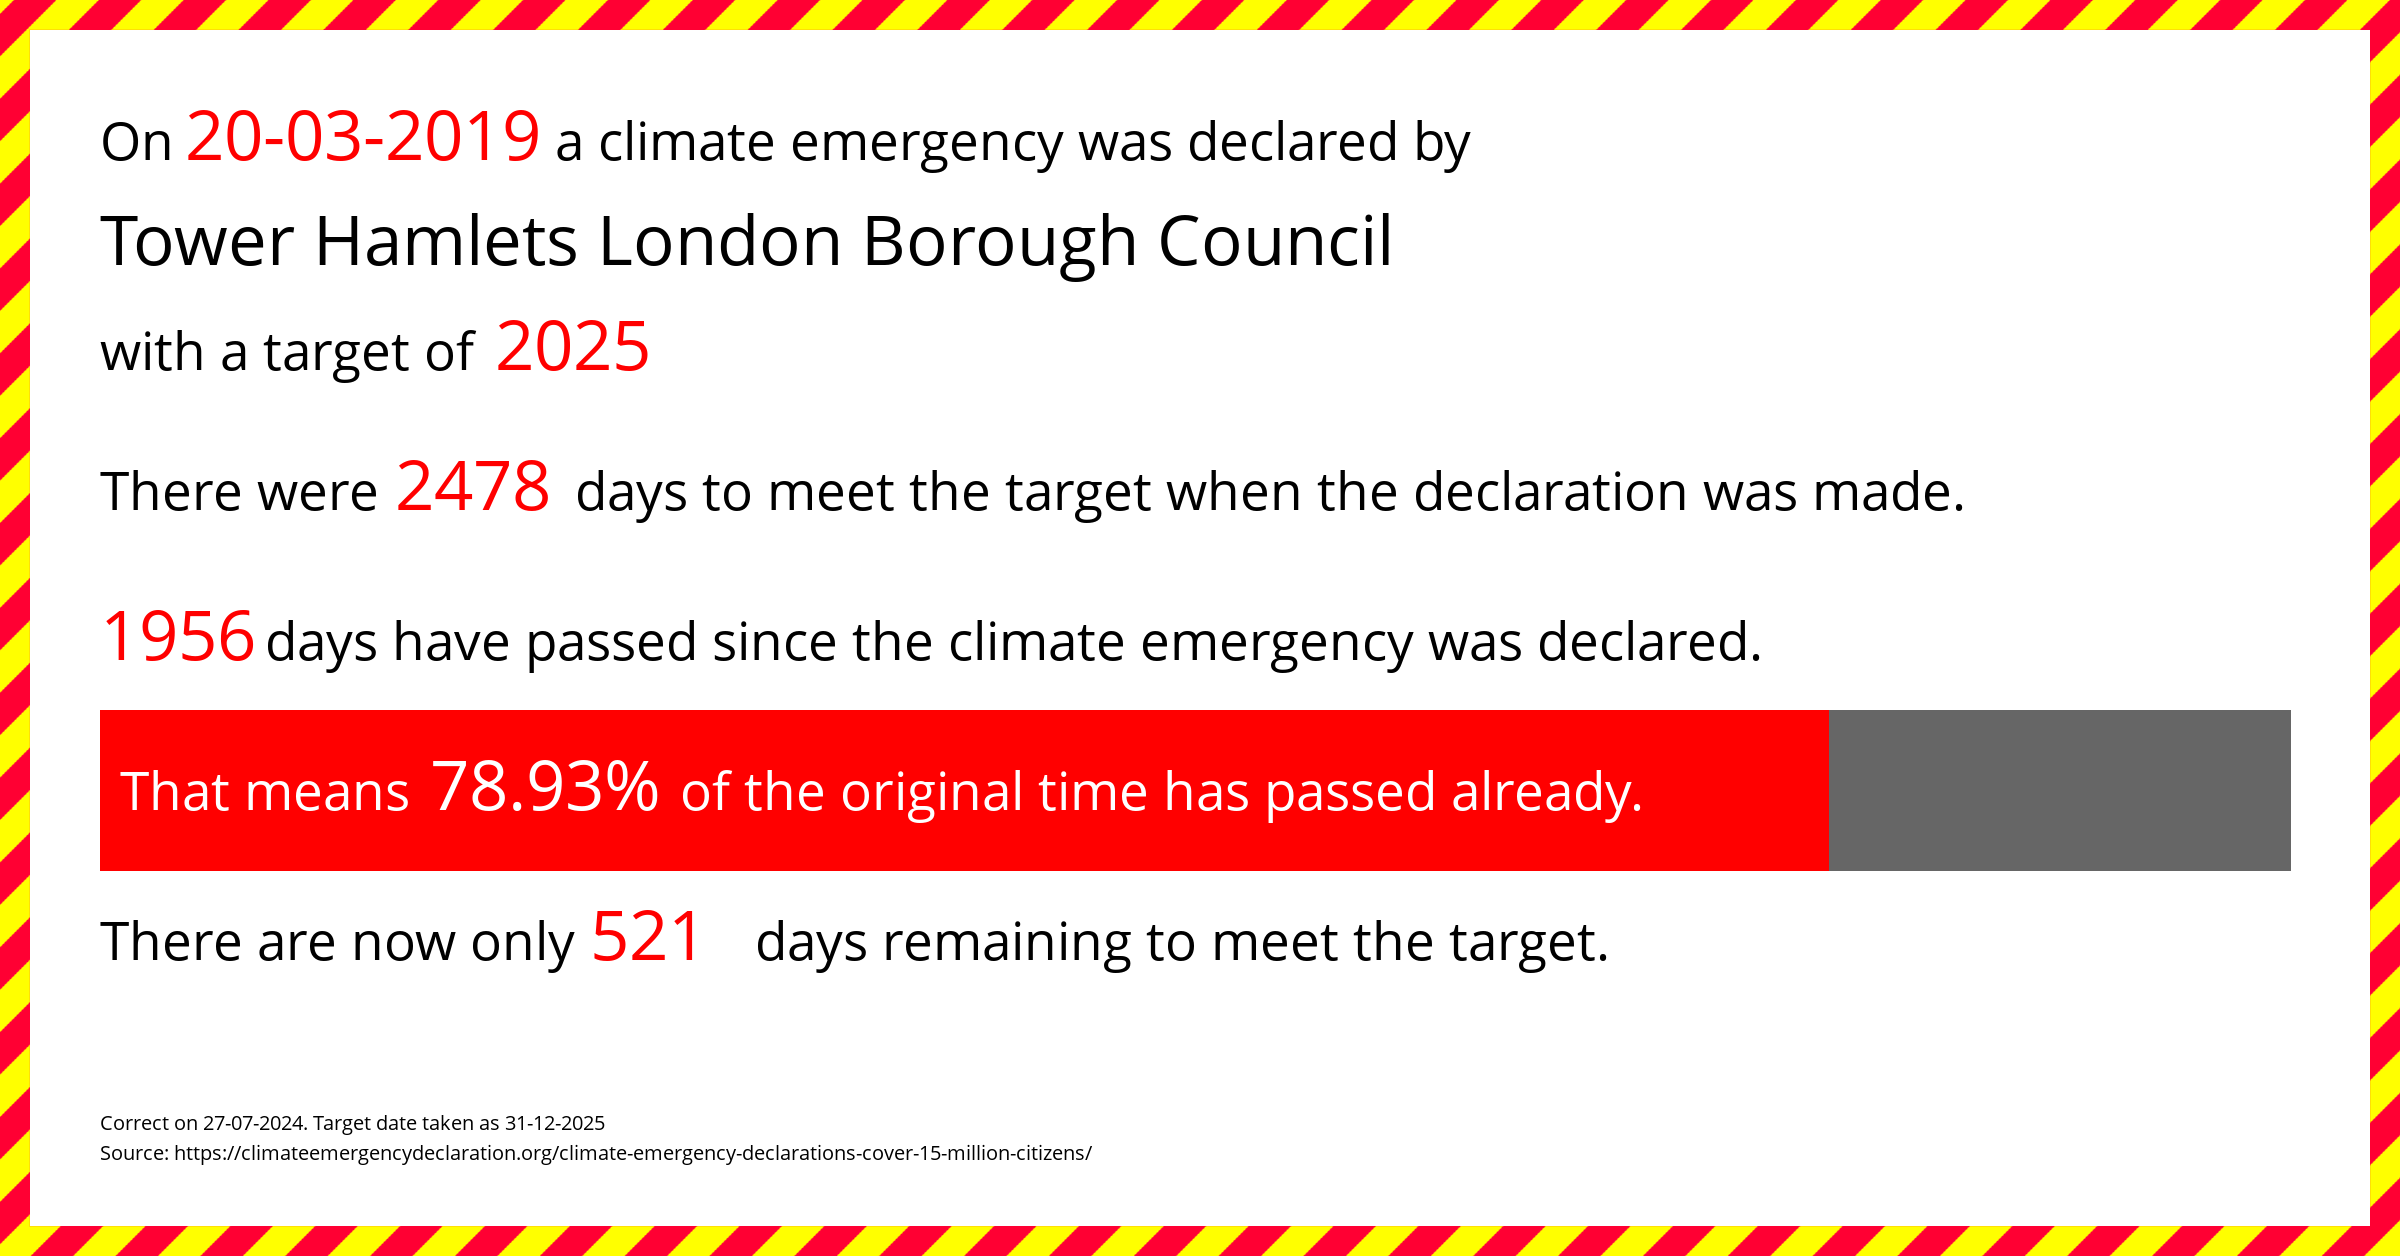 Tower Hamlets London Borough Council declared a Climate emergency on Wednesday 20th March 2019, with a target of 2025.